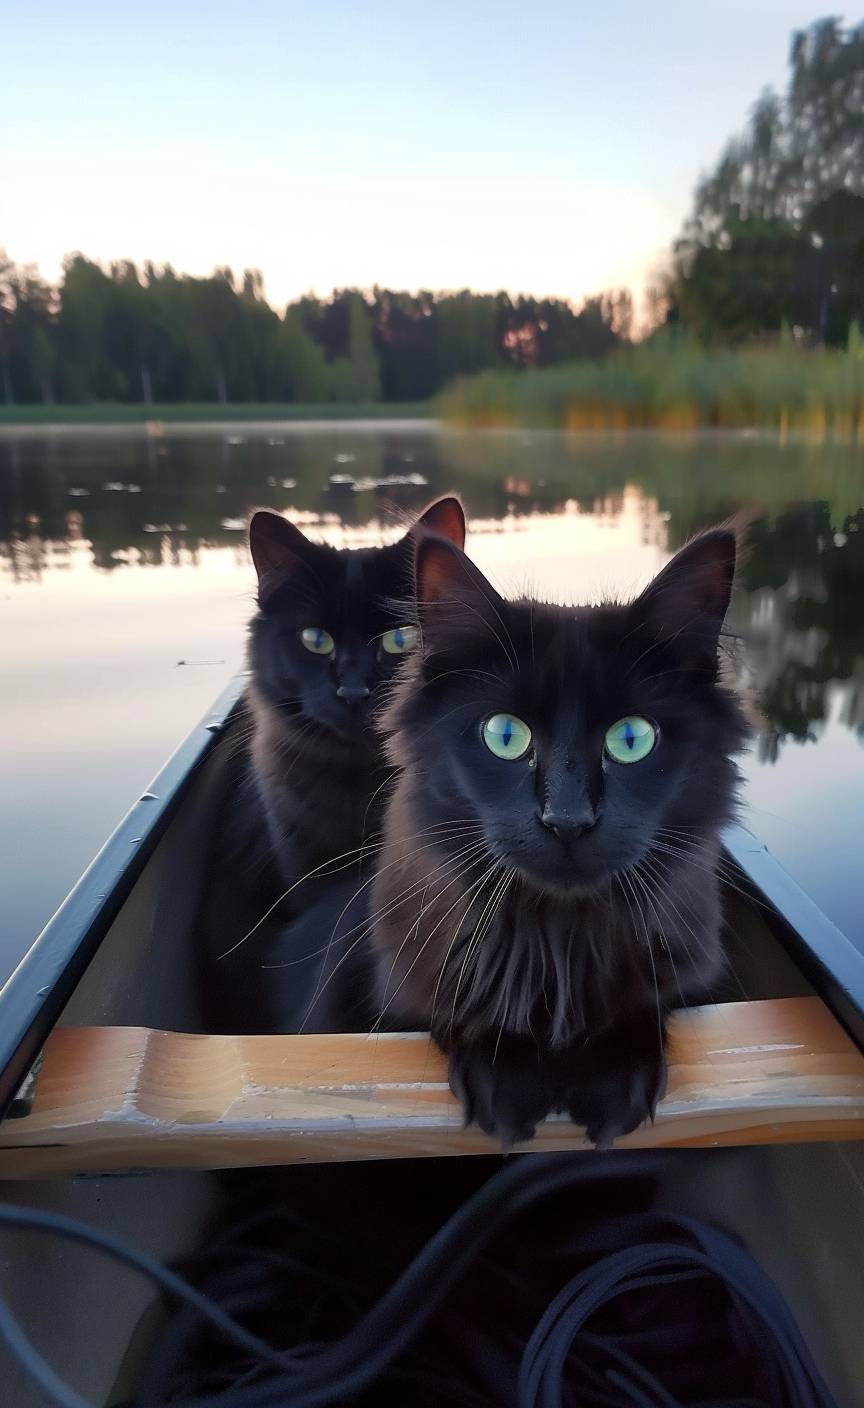 In 2018, a mobile phone video was taken from a low camera angle, showing two black cats with green eyes in a canoe on the lake at dusk. The video was posted to Snapchat.